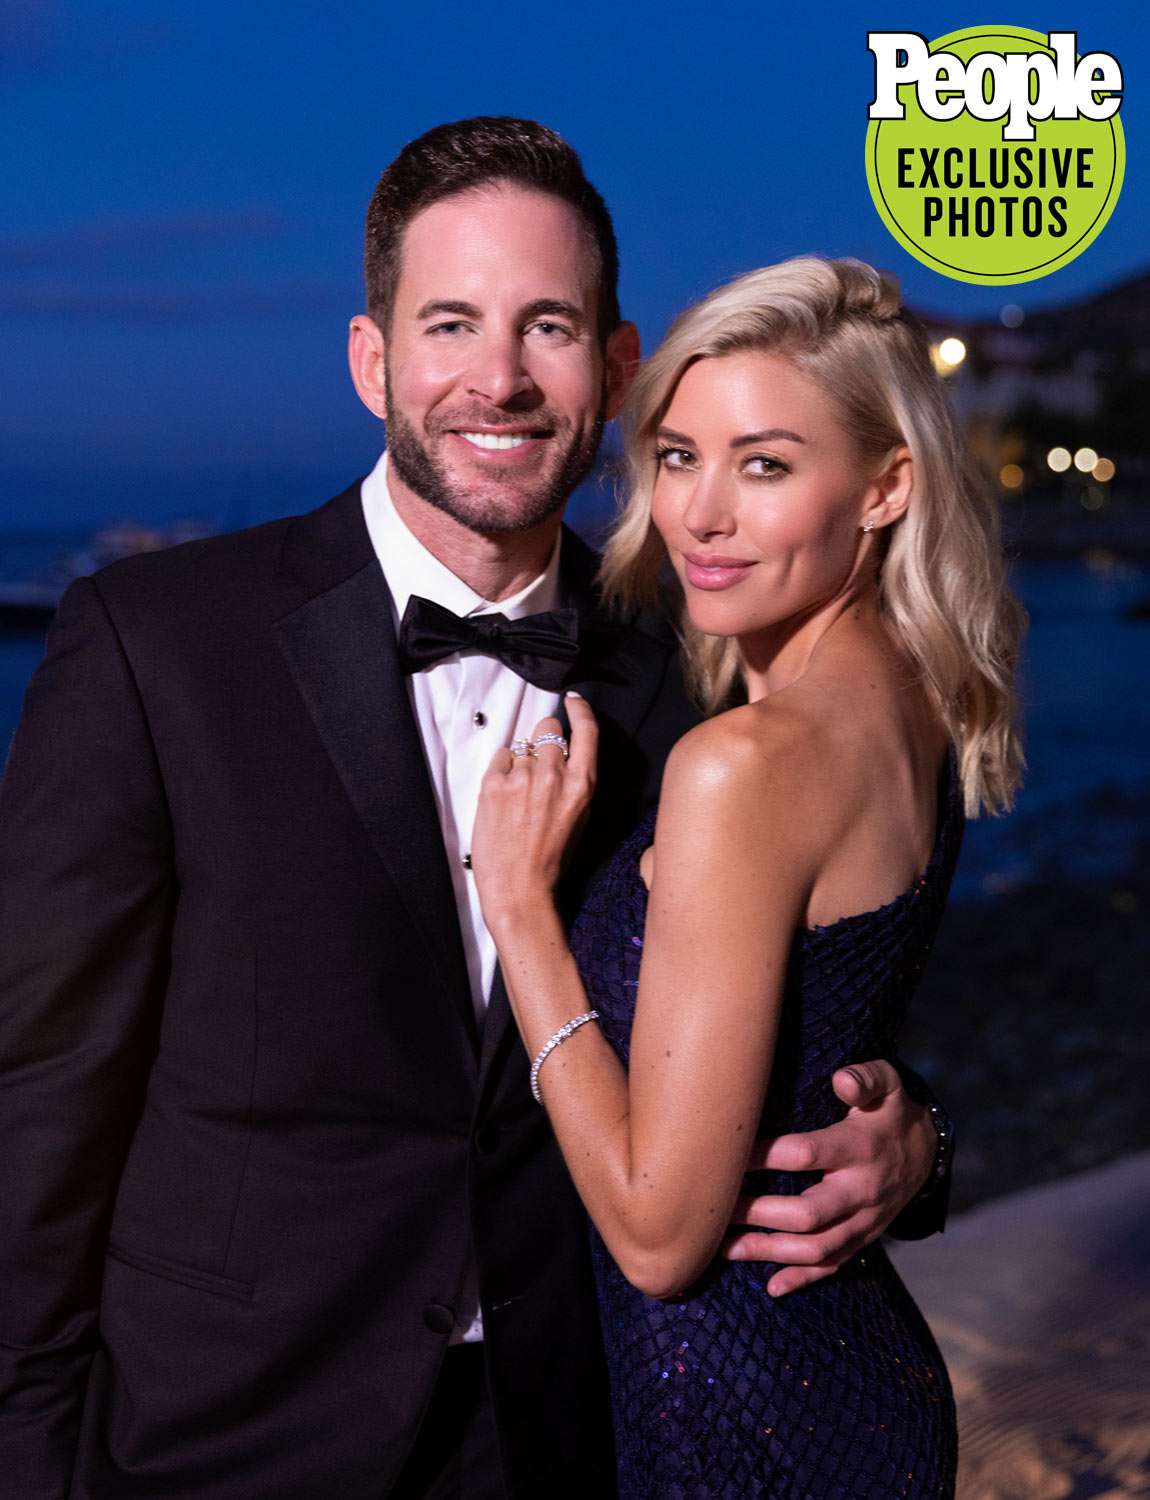 Tarek El Moussa and Heather Rae Young Engagement